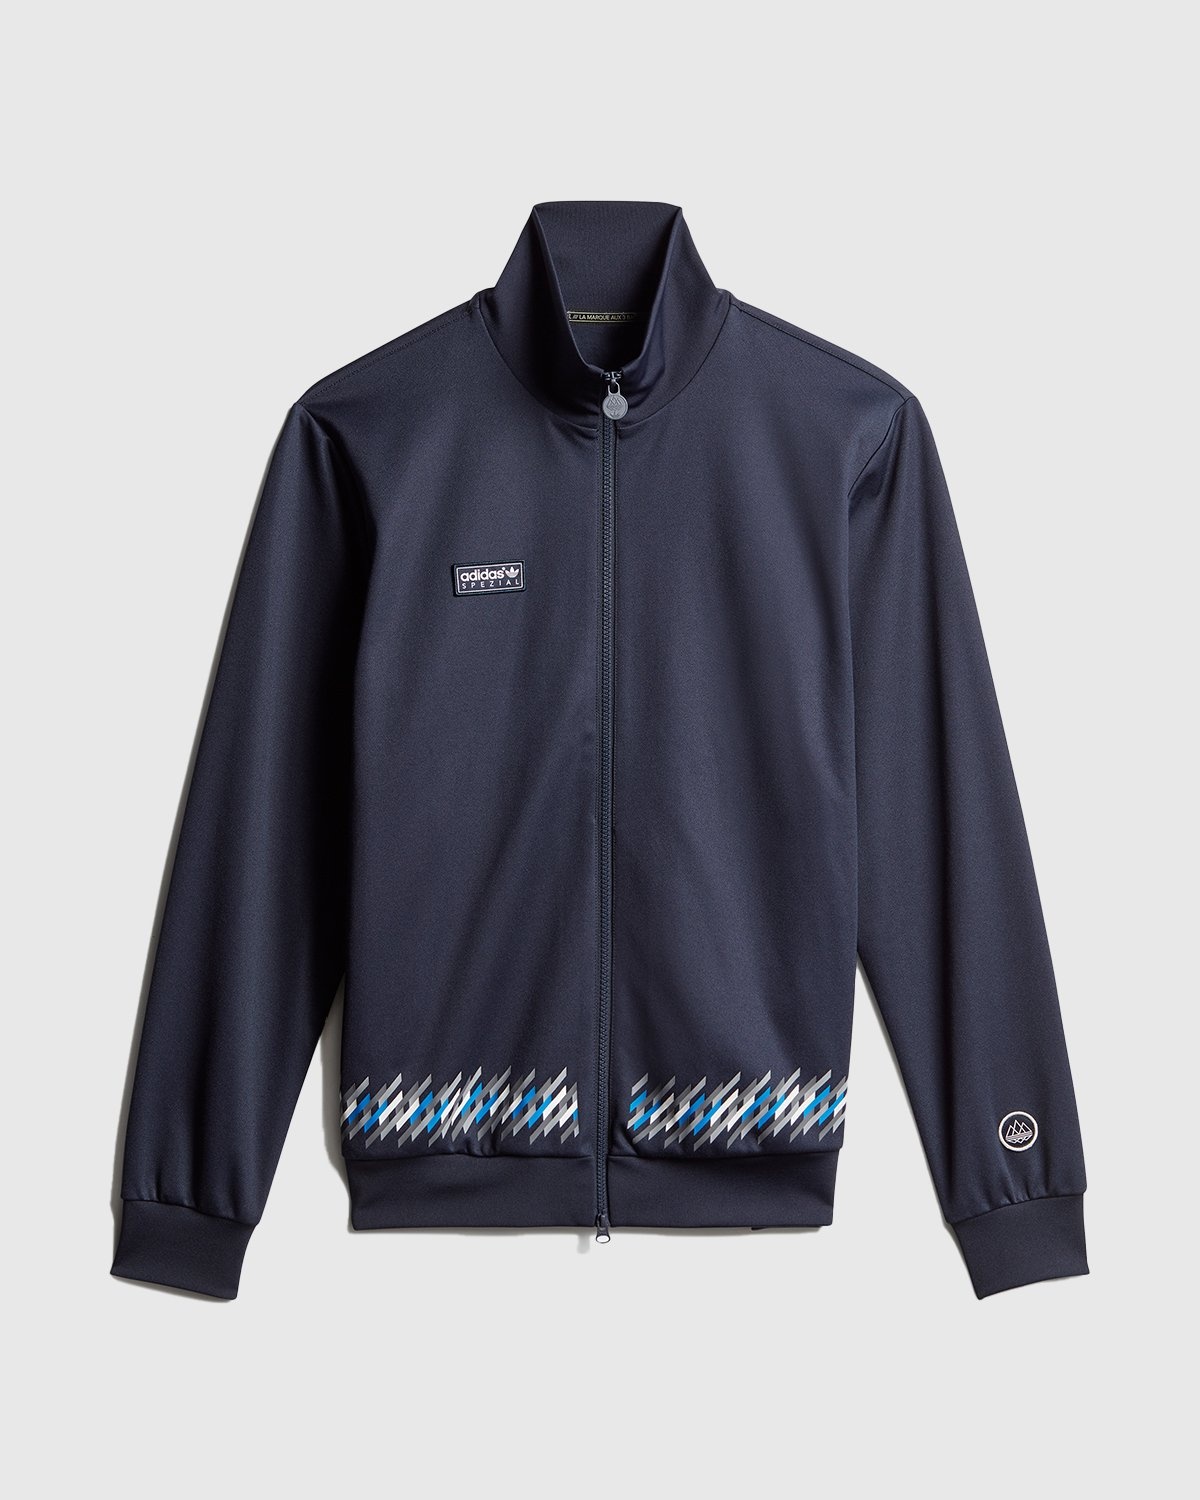 Adidas – Track Top Spezial x New Order Navy - Sweats - Blue - Image 1